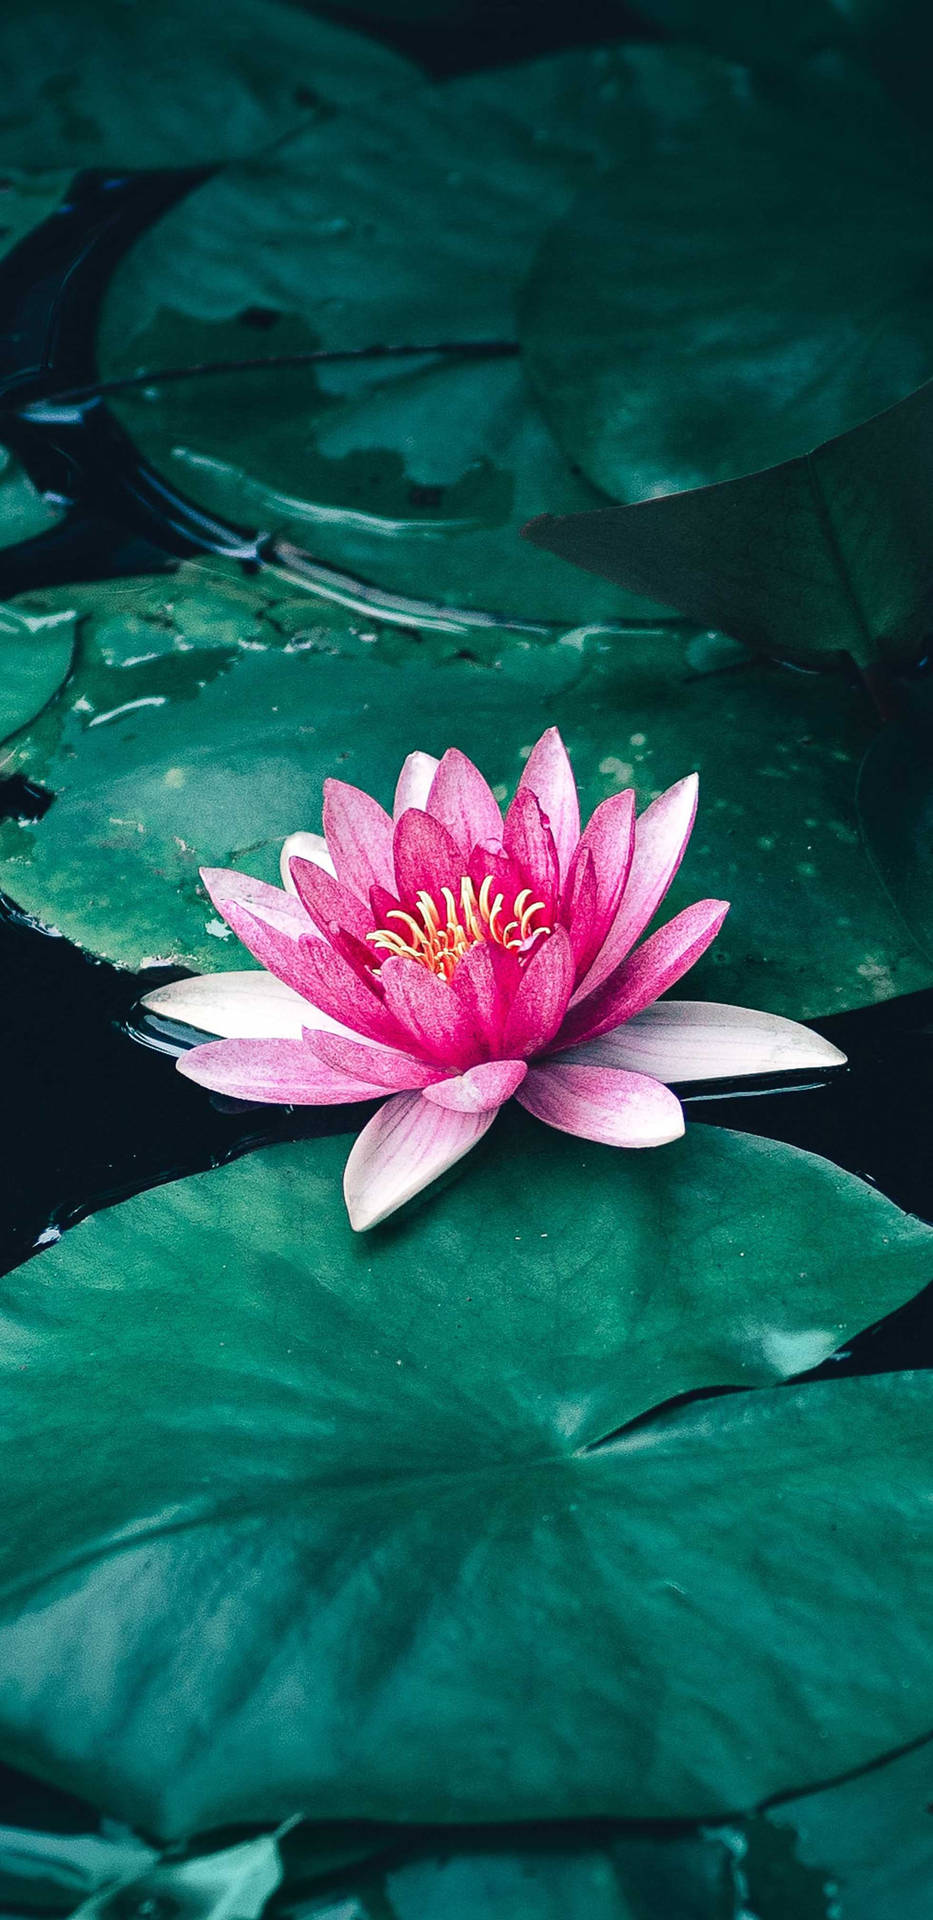 Pygmy Water Lily 4k Hd Mobile Background